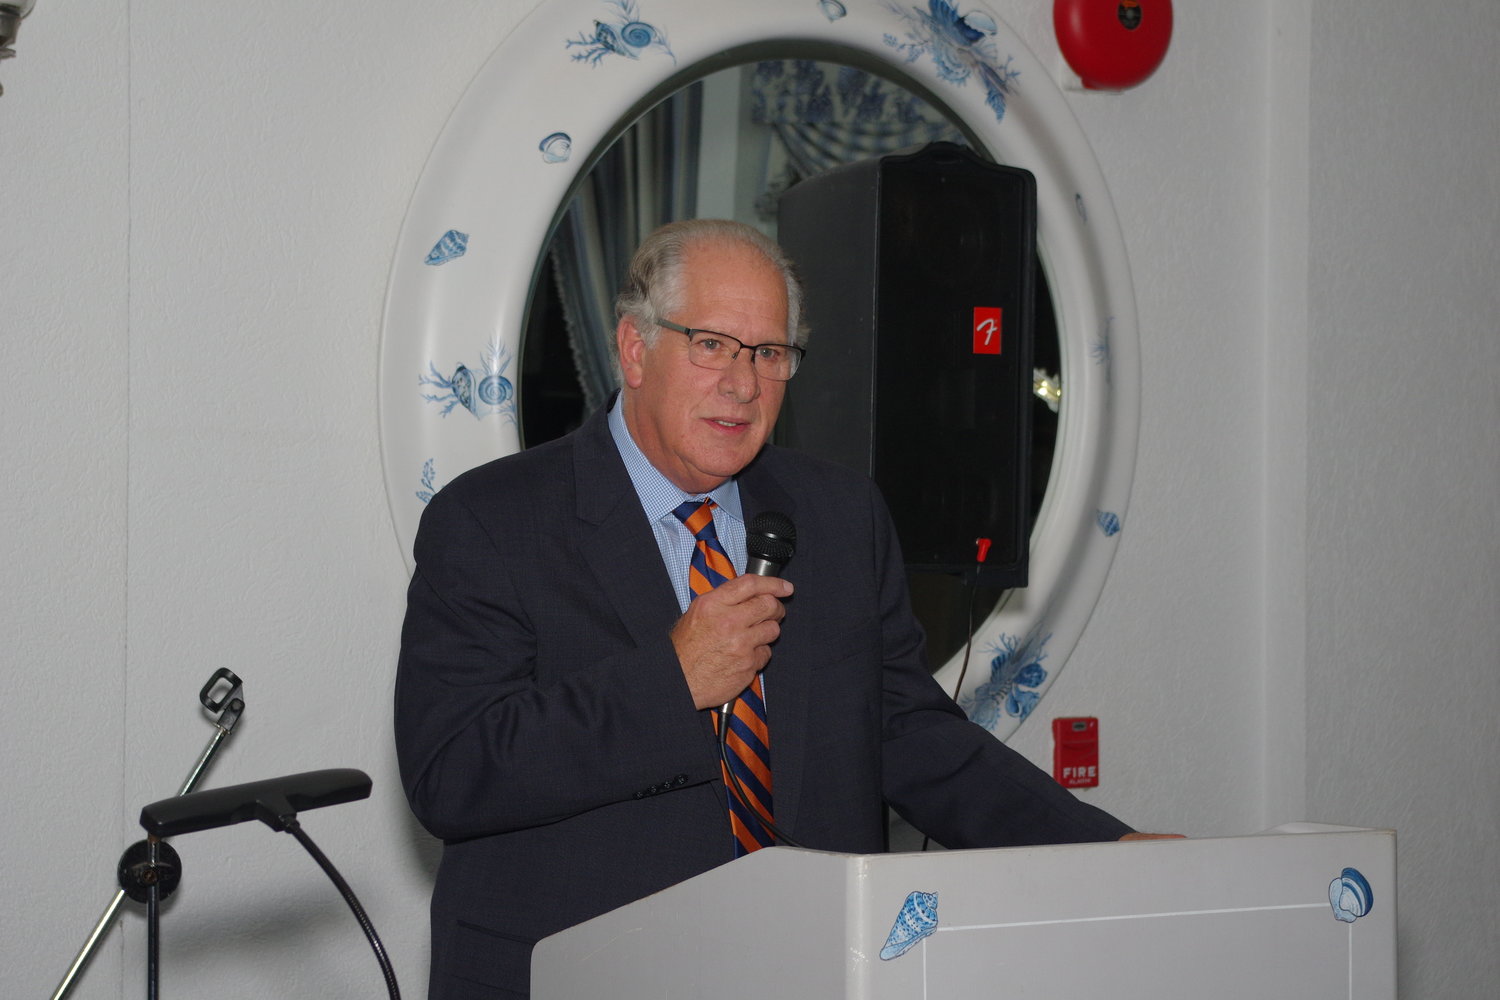 Tony Cancellieri, Vice Chairman of Mount Sinai South Nassau’s Board of Trustees and a member of the Board of Trustees at the Mount Sinai Health System, spoke at the Guiding Lights gala